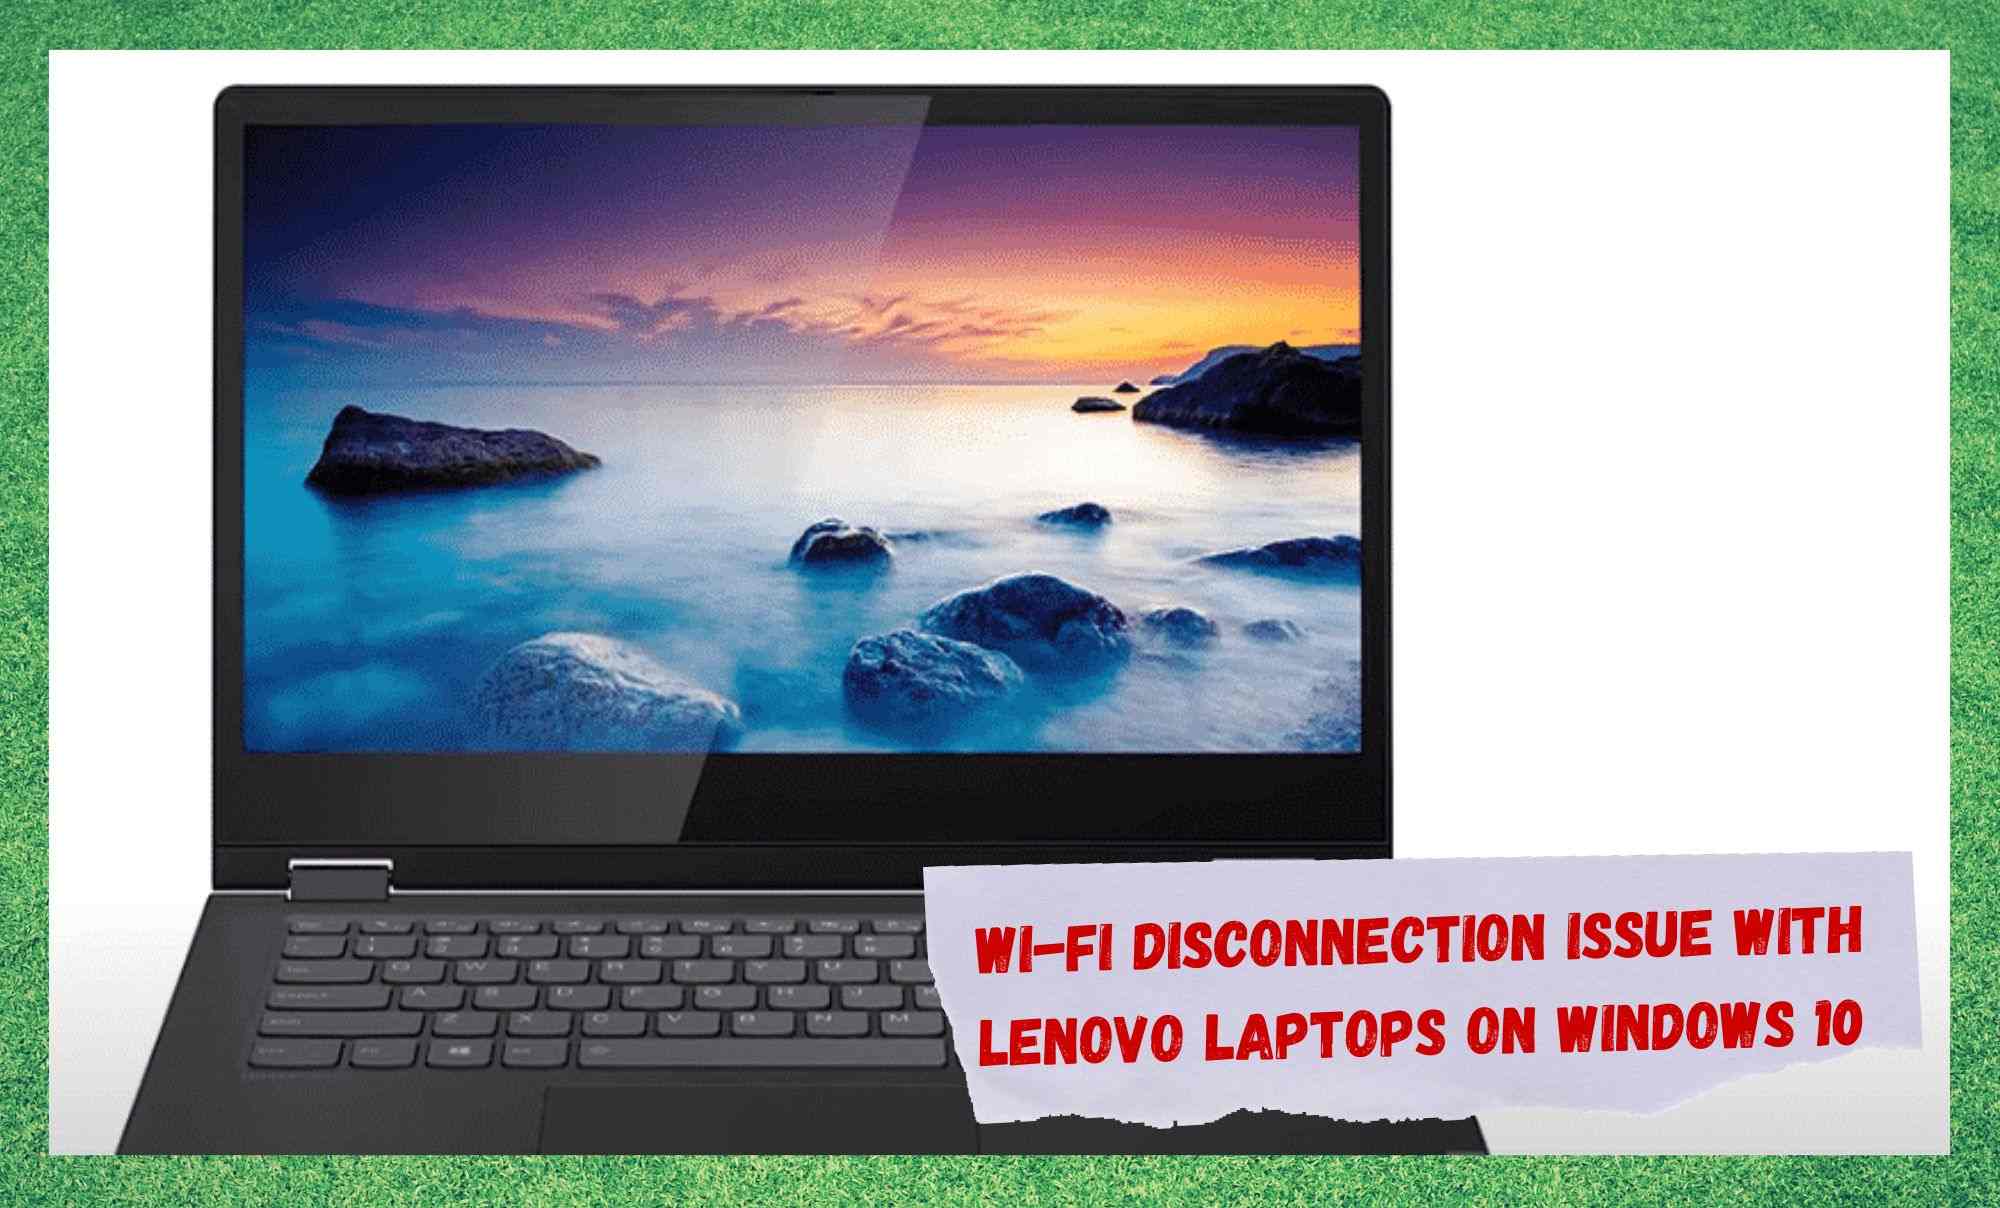 lenovo laptop keeps disconnecting from wifi windows 10